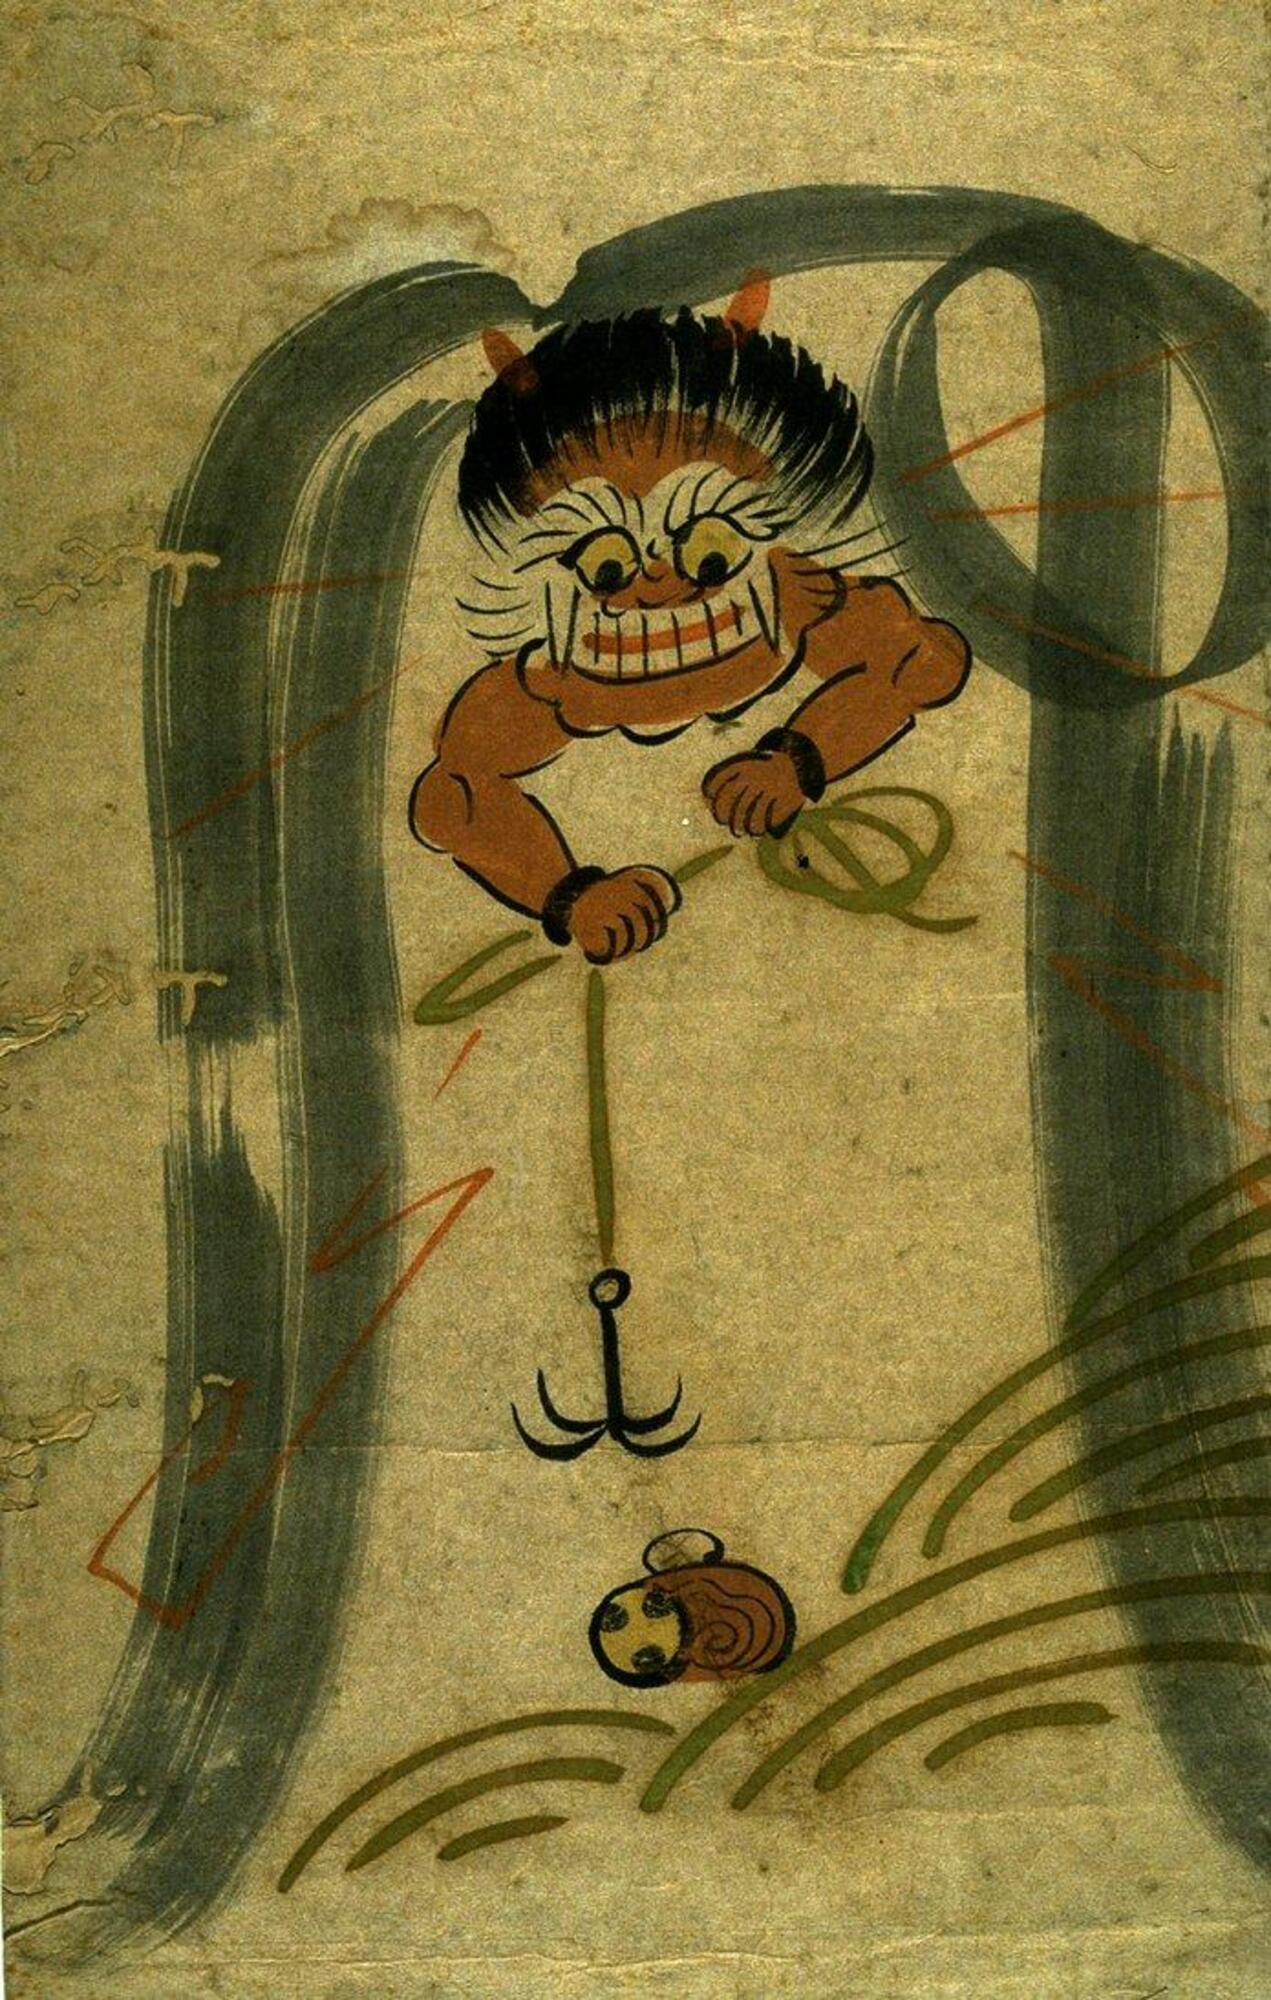 This painting portrays the Thunder God (Raijin), a powerful and ferocious figure, is fishing for his drum, carelessly dropped in the ocean.